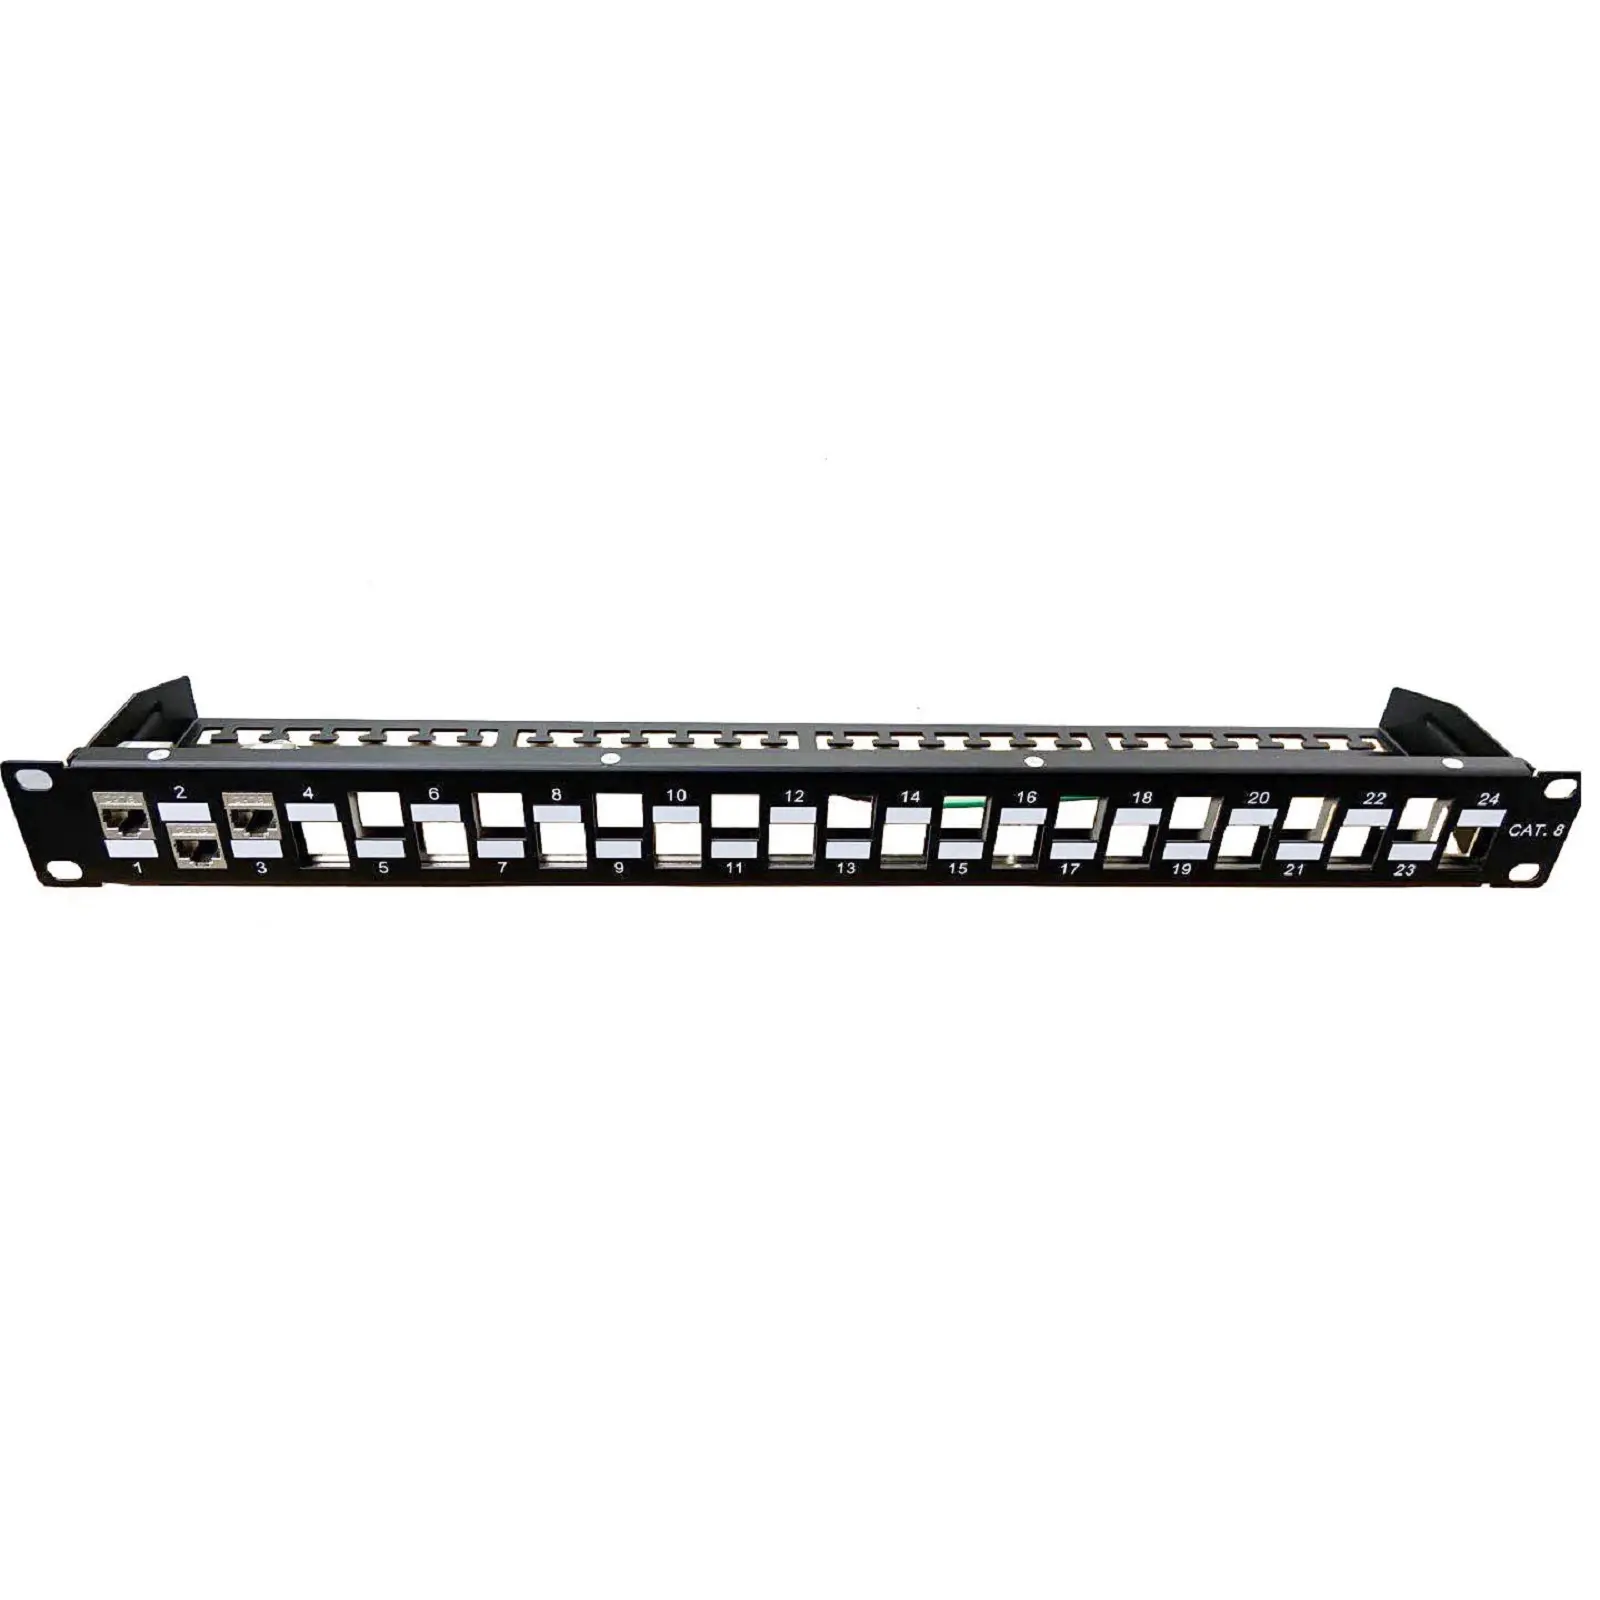 Chất Lượng Cao Rack Mounted Trống Patch Panel STP 24 Port Cat8 Patch Panel